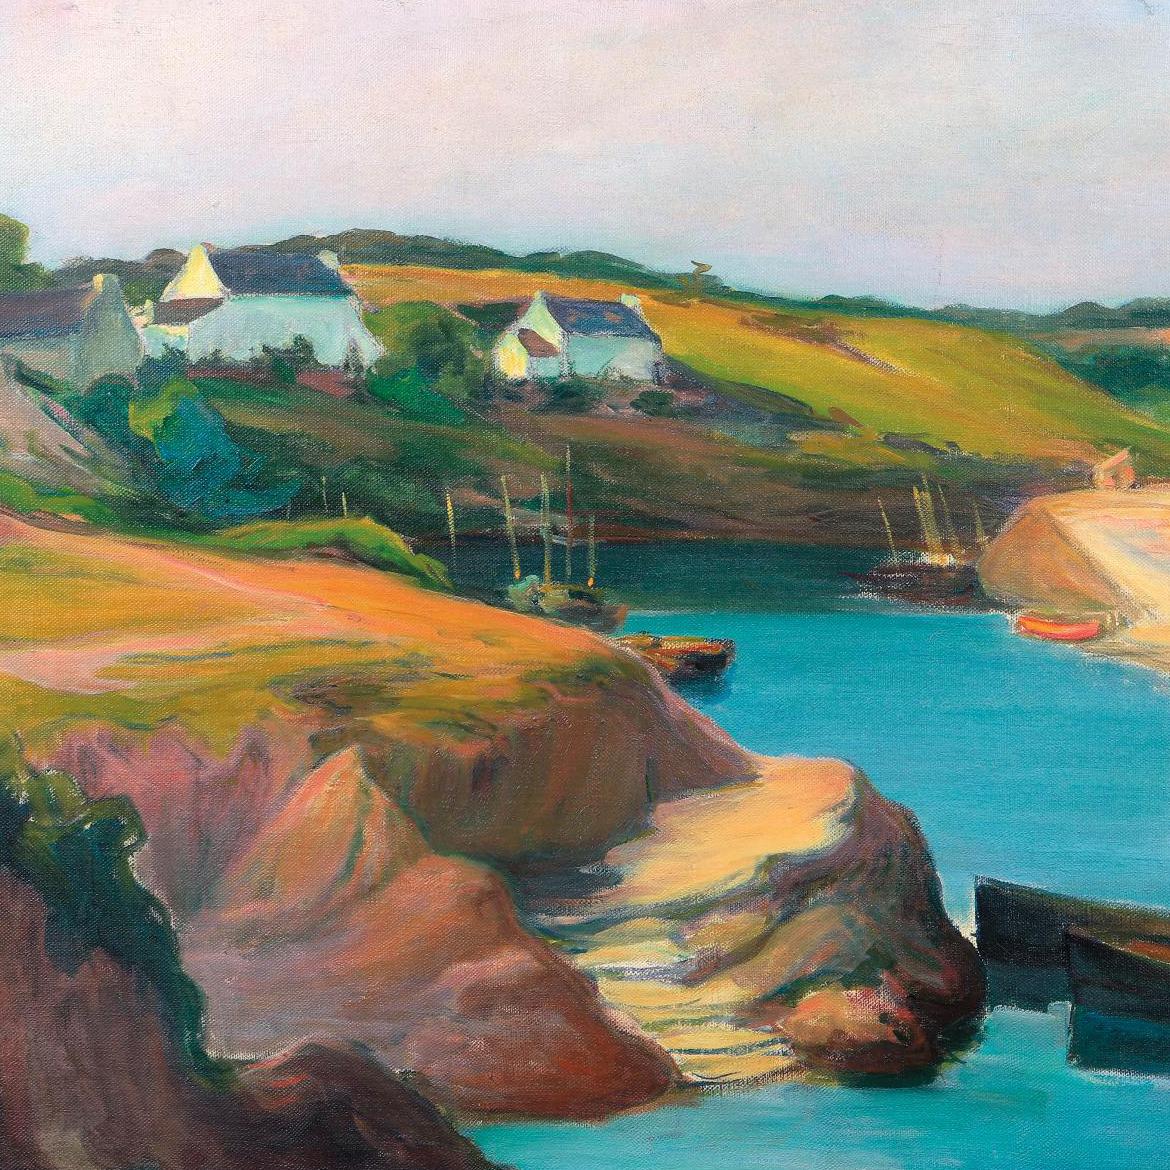 Ladislas Slewinski and Roderic O'Conor: An Ode to Pont-Aven  - Lots sold